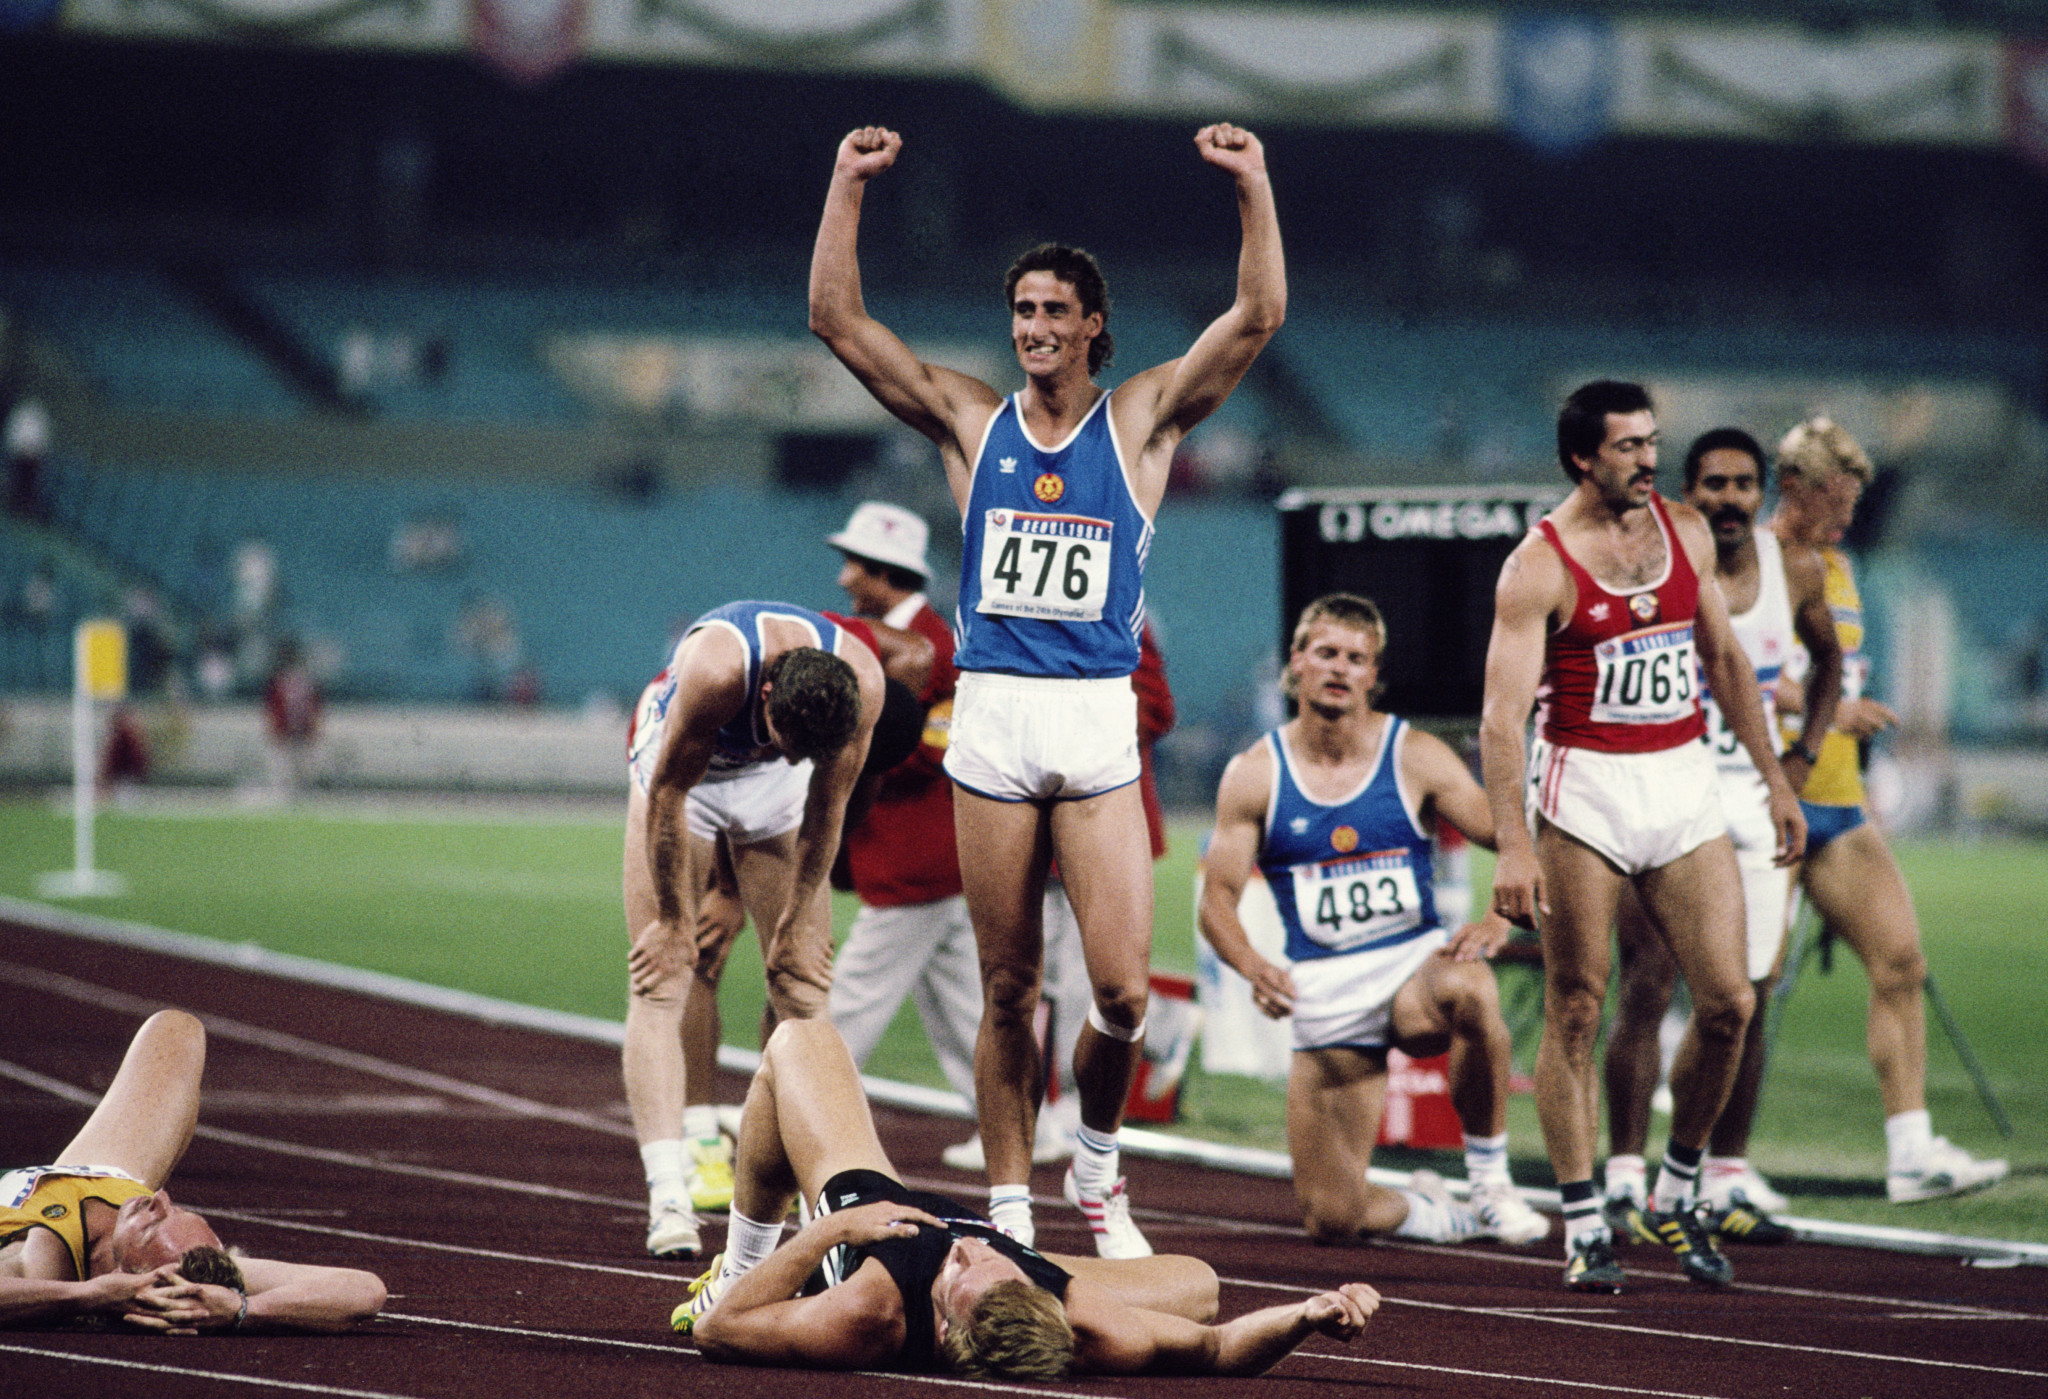 Christian Schenk will retain his gold medal from Seoul 1988 ©Getty Images